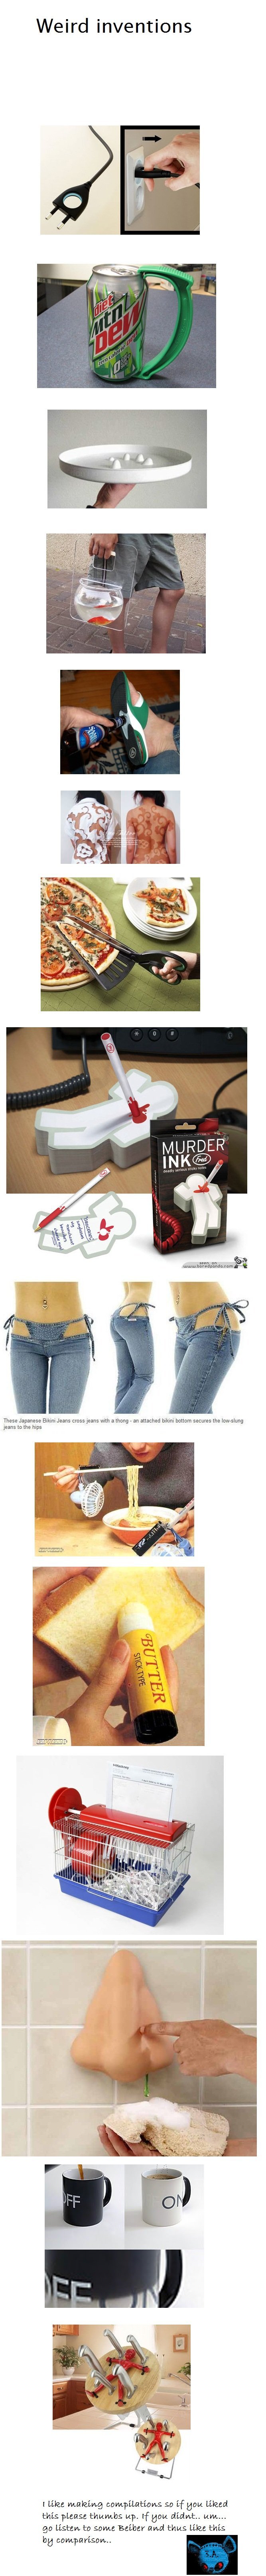 Weird Inventions. THUMBS IF U WANT ONE OF THESE?. Weird inventions These Japanese Bum Jeans uess, eans mm attached mm bottom secures the pans lathe mps I Like m